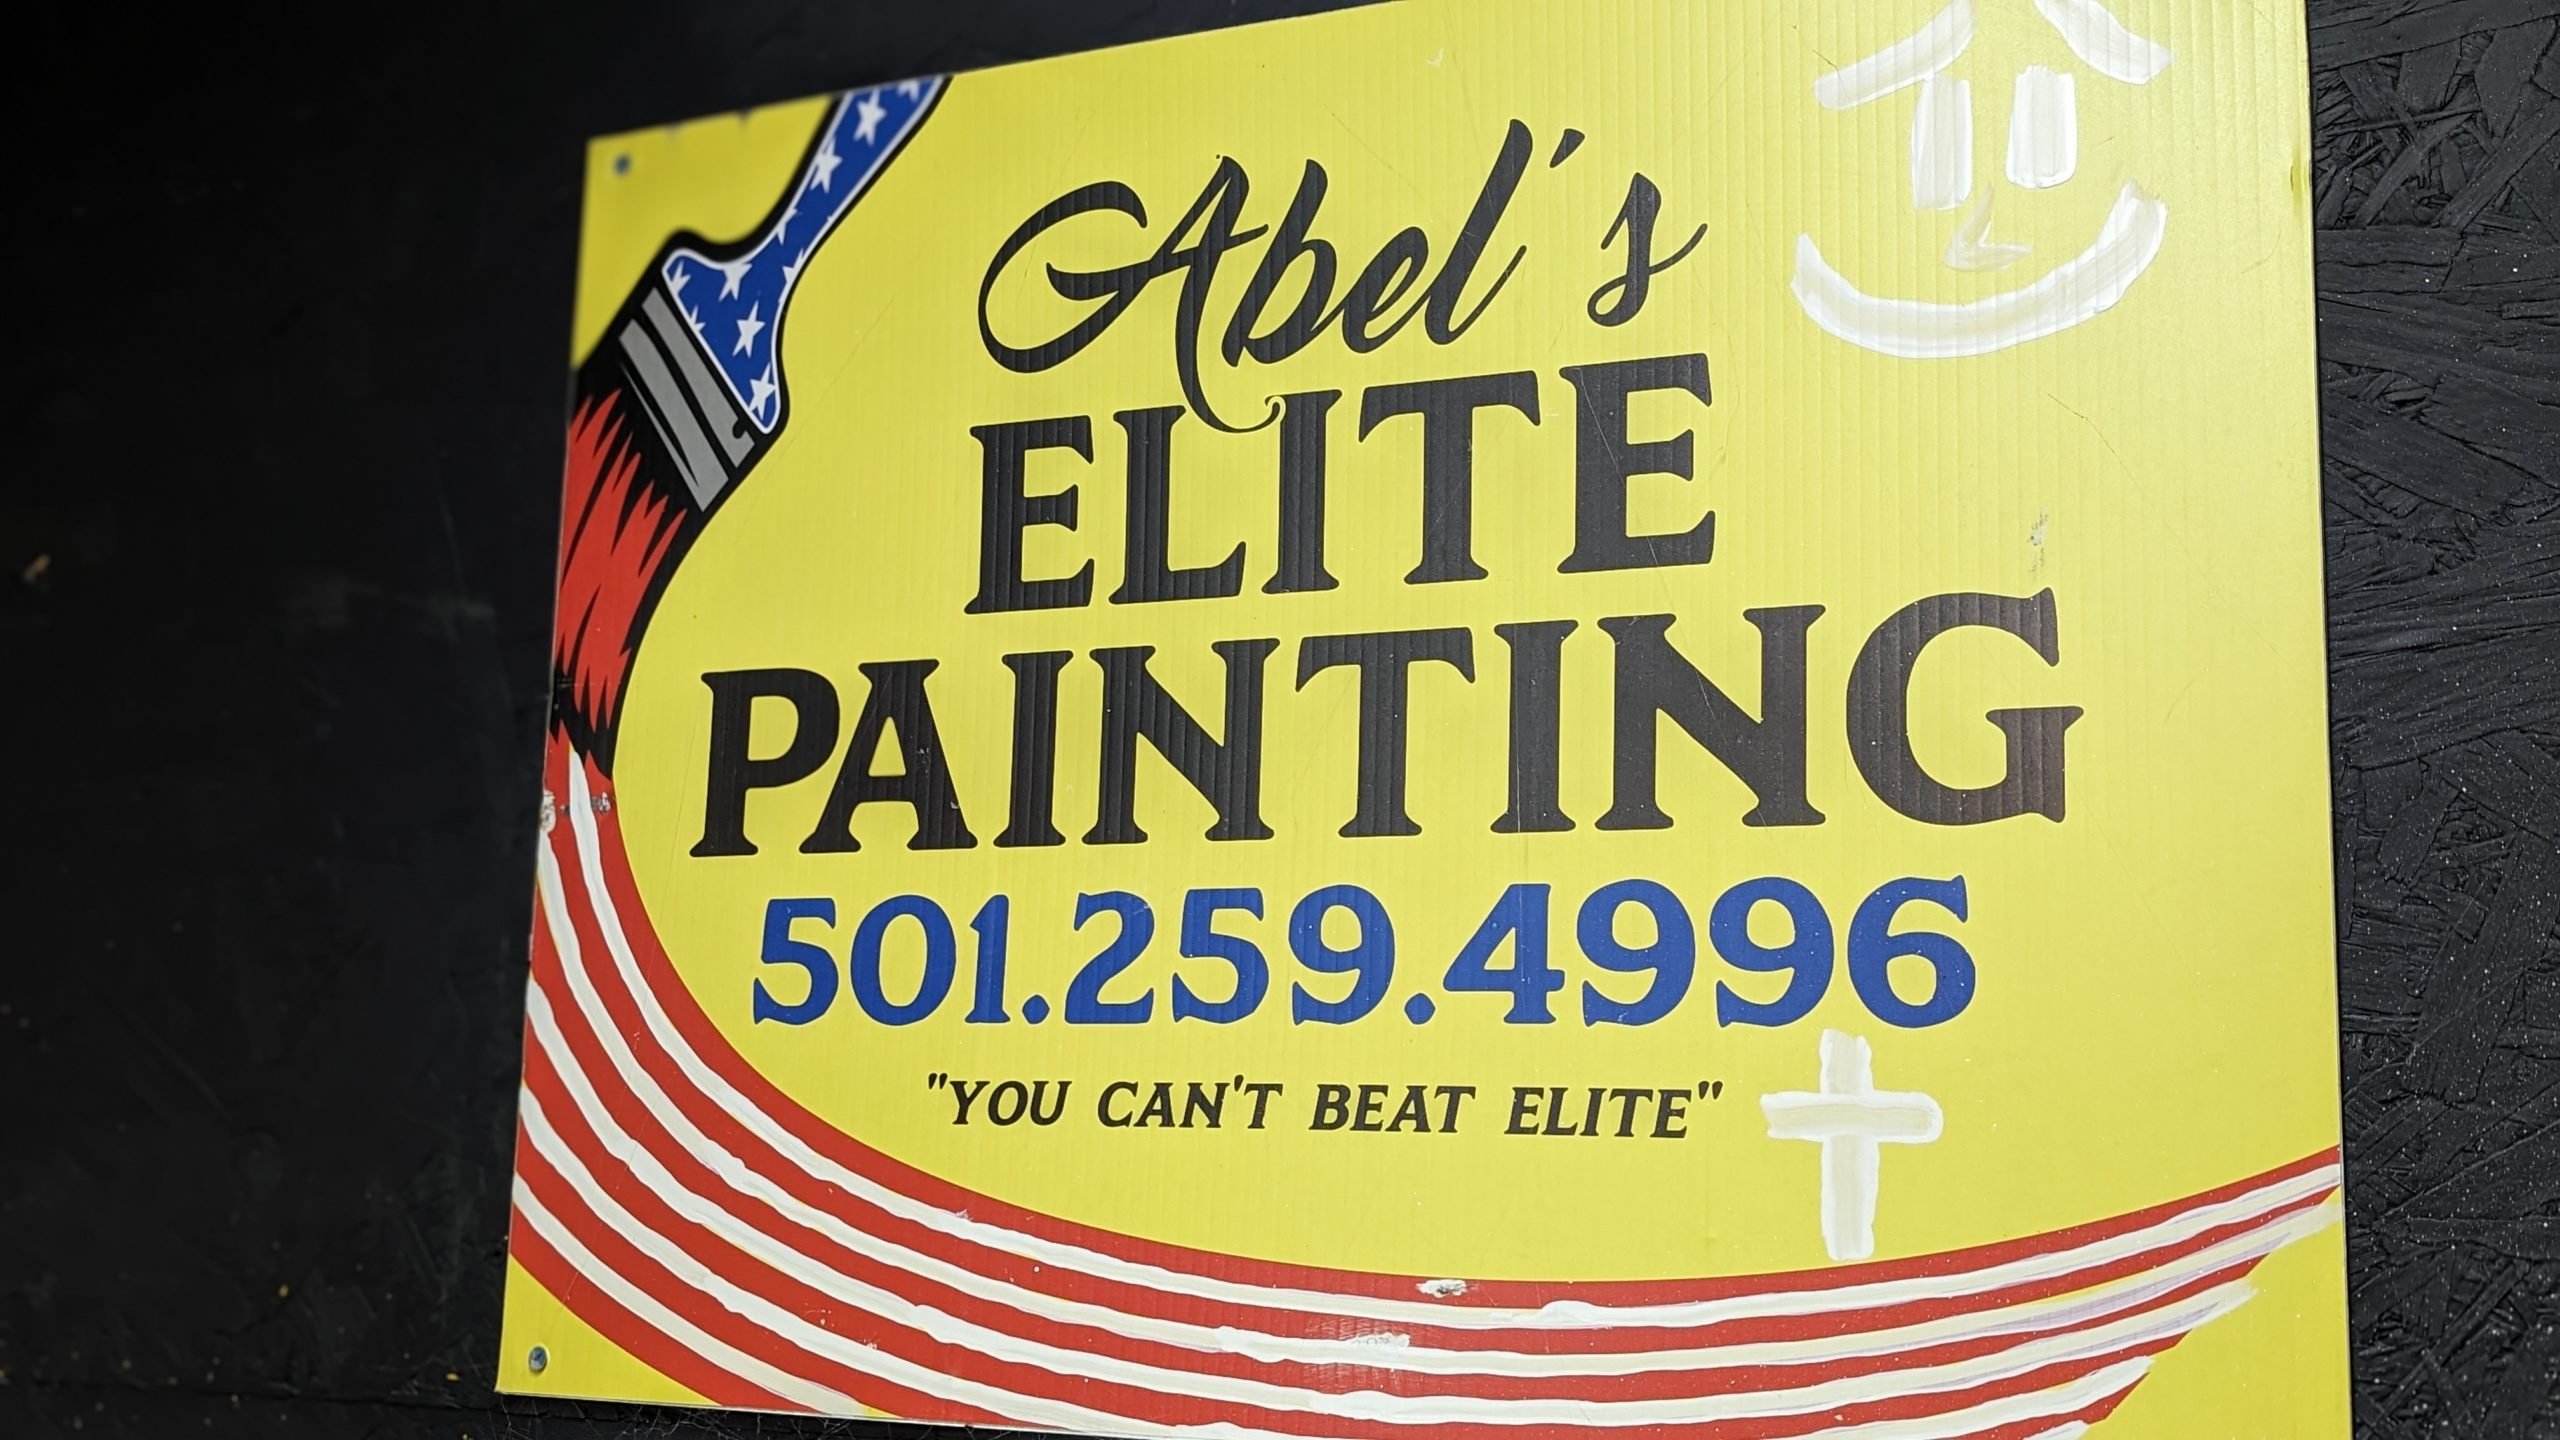 Craftsmanship and Community: The Story of Abel’s Elite Painting